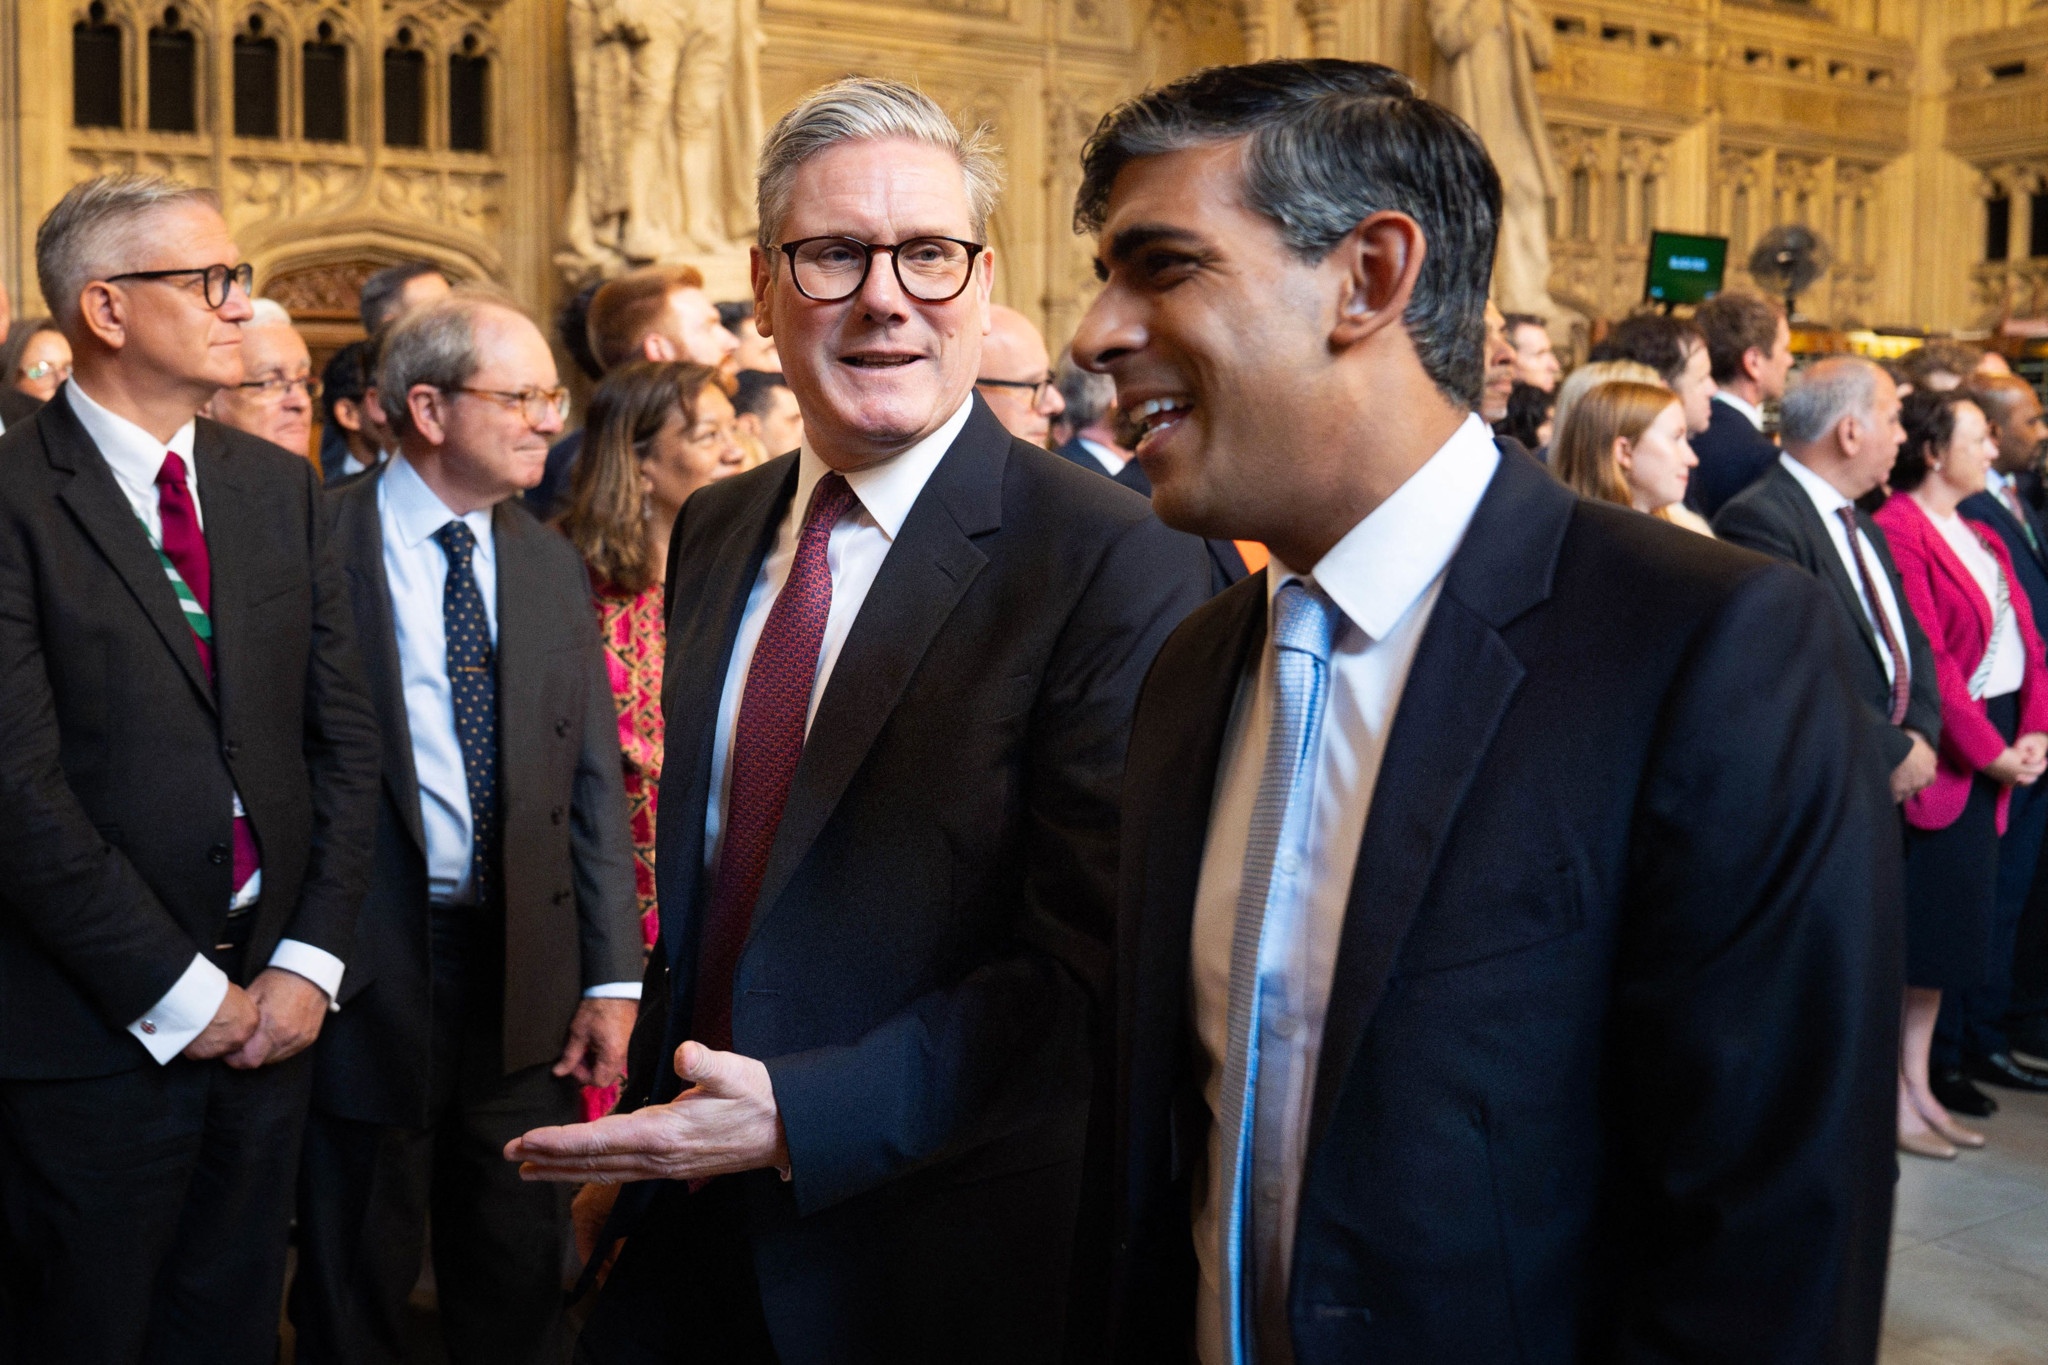 Britain's Prime Minister Keir Starmer (L) and Britain's Conservative Party opposition leader Rishi Sunak (R) speak together as they process through the Central Lobby during the State Opening of Parliament at the Houses of Parliament, in London, on July 17, 2024. (Photo by Stefan Rousseau / POOL / AFP)